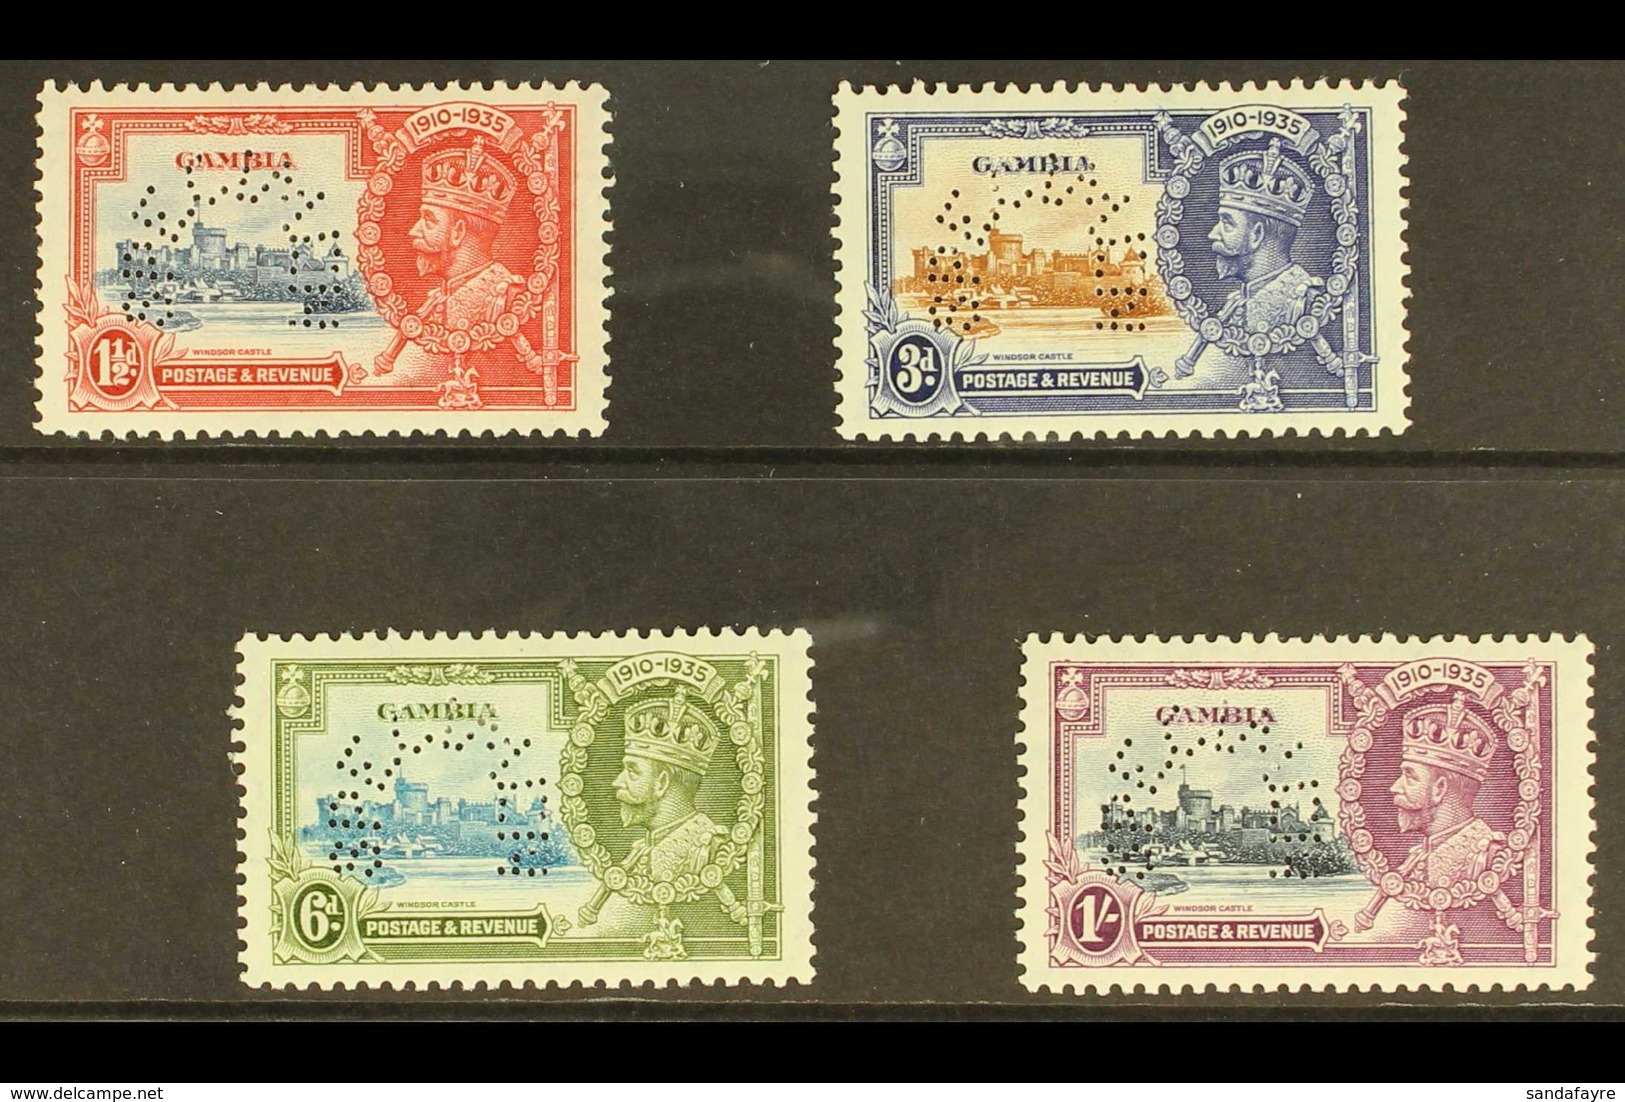 1935 Silver Jubilee Set Complete, Perforated "Specimen", SG 143s/6s, Very Fine Mint. (4 Stamps) For More Images, Please  - Gambie (...-1964)